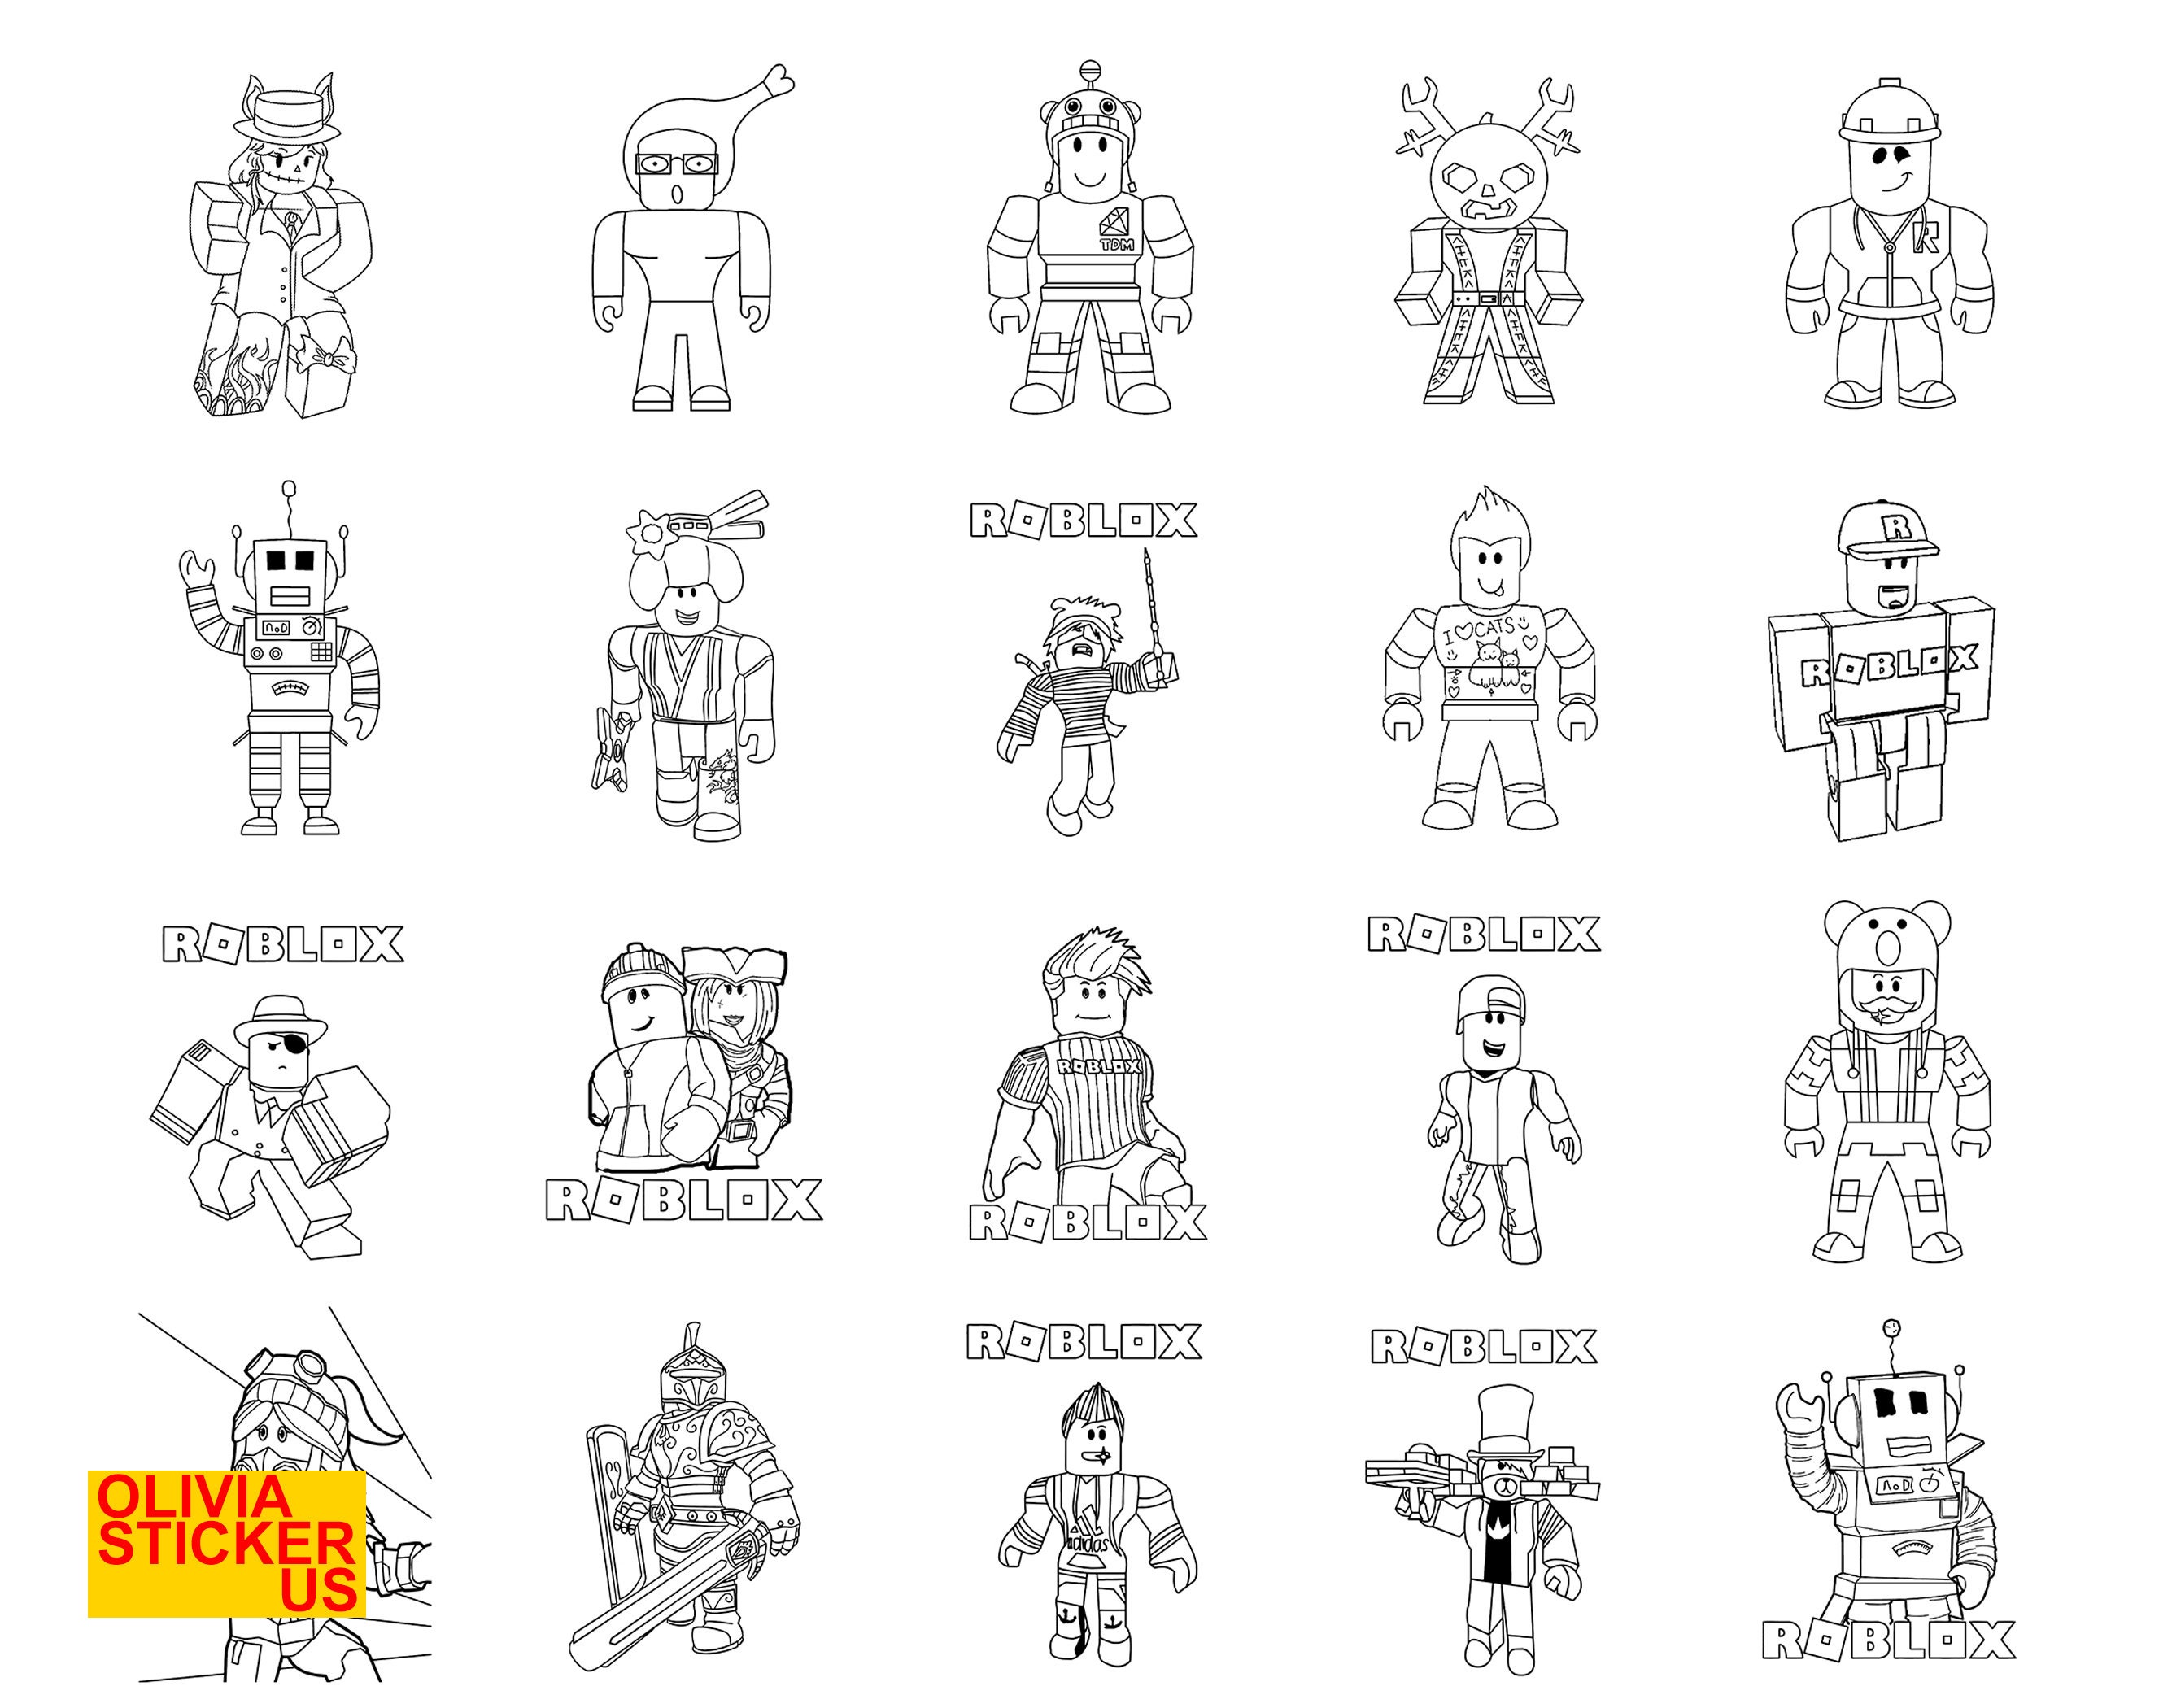 Roblox printable coloring page coloring pages pdf and jpg